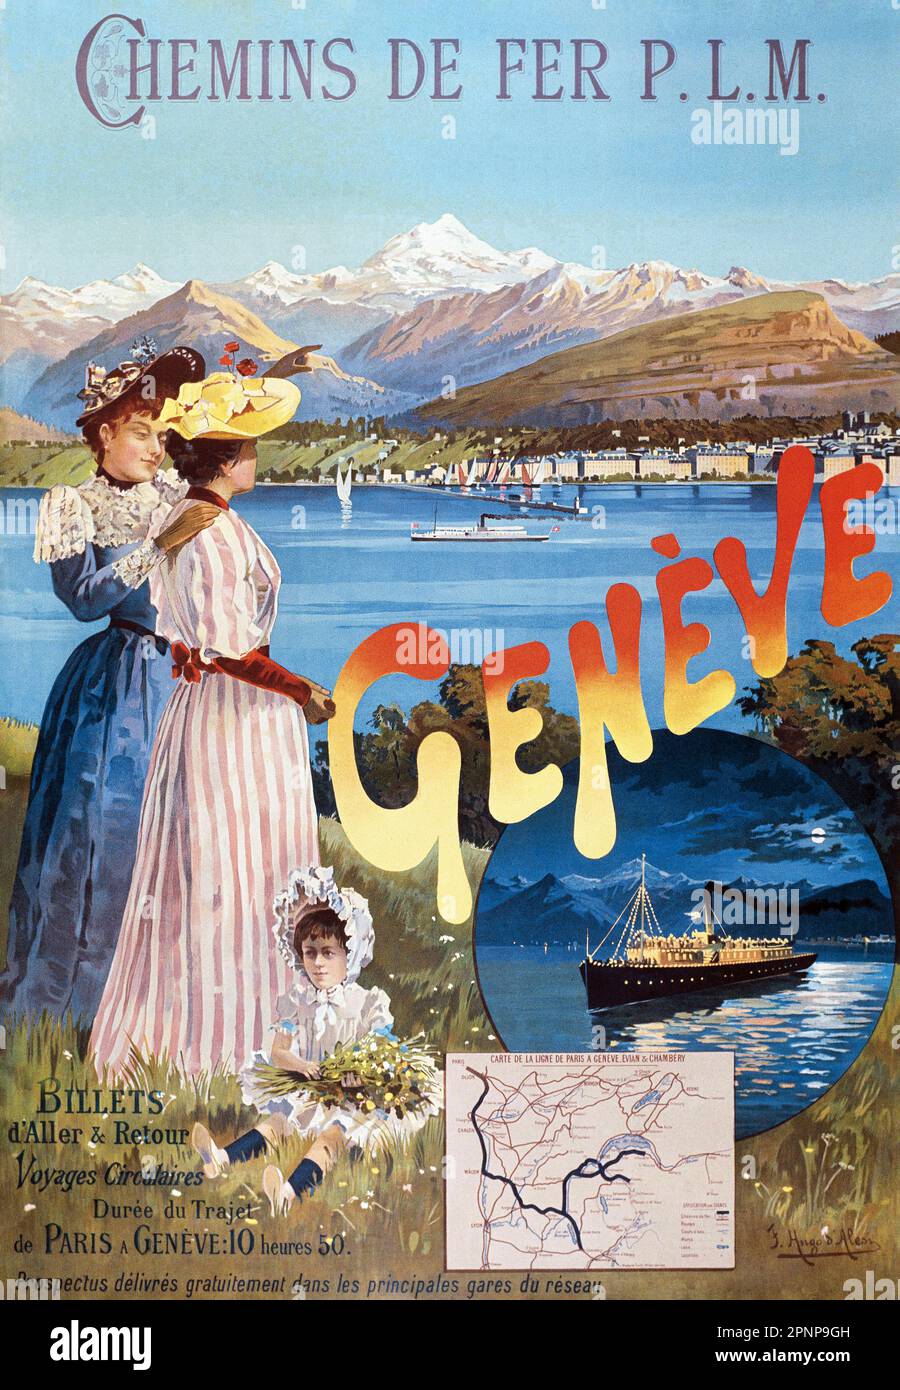 Chemins de fer P.L.M. Genève by Frederic Hugo d'Alési (1849-1906). Published in 1890 in Switzerland. Stock Photo